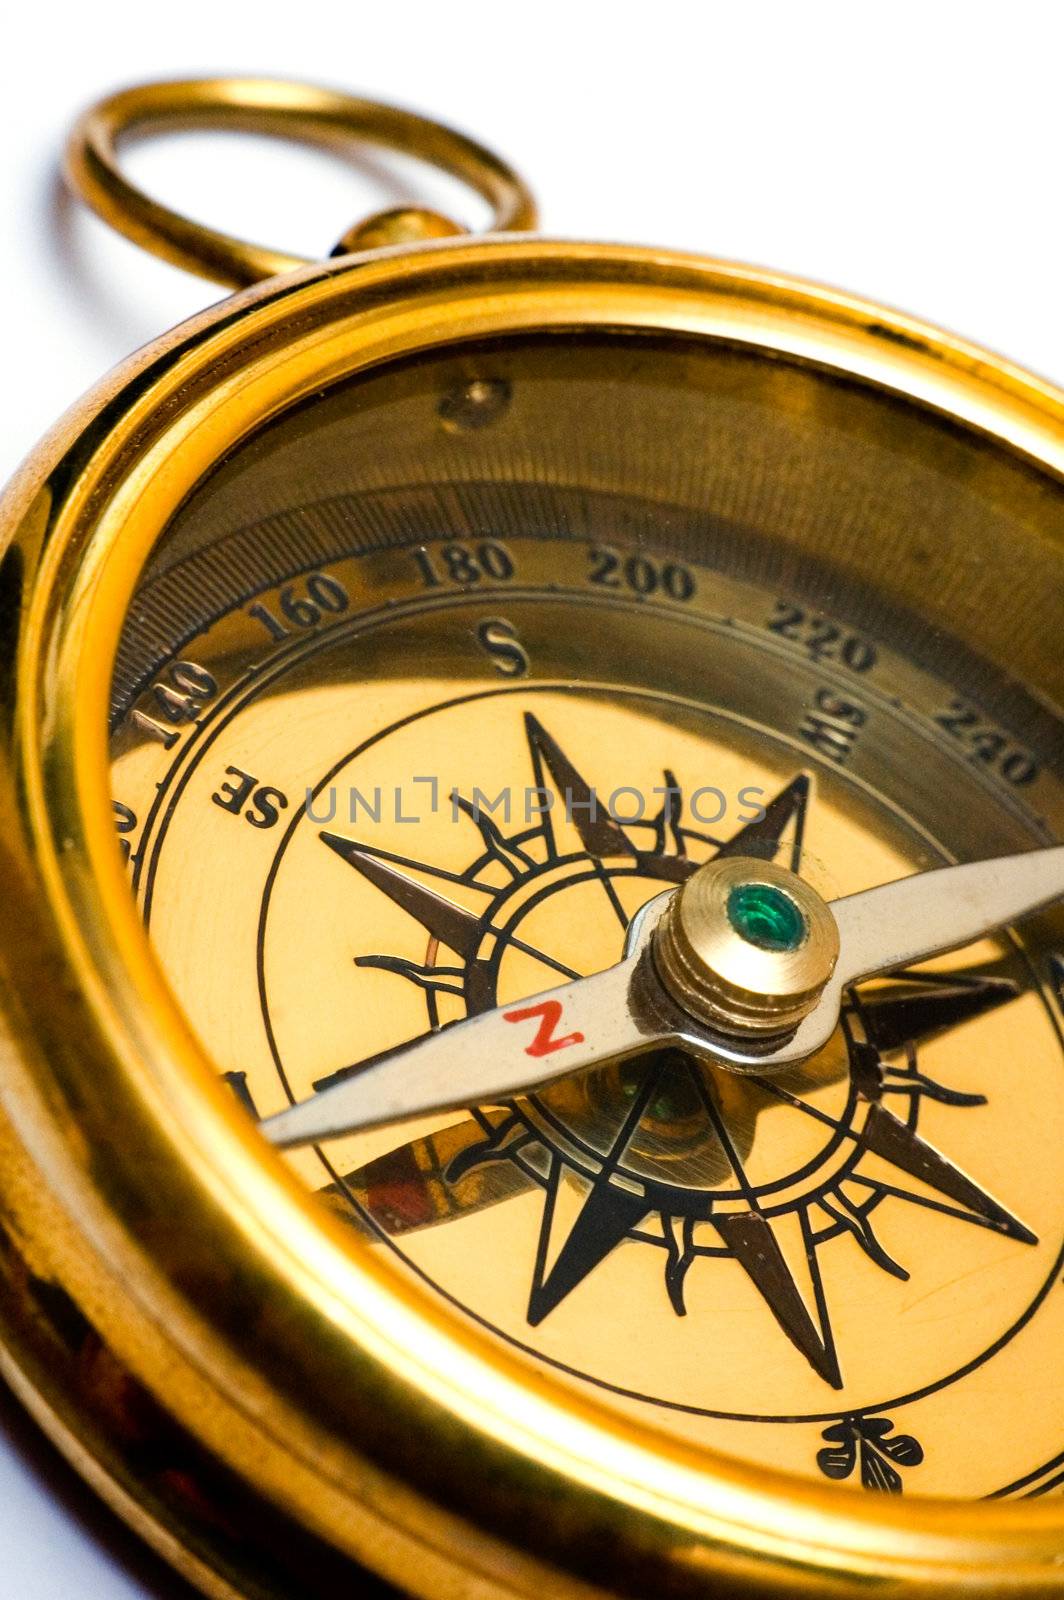 Old style brass compass on white background